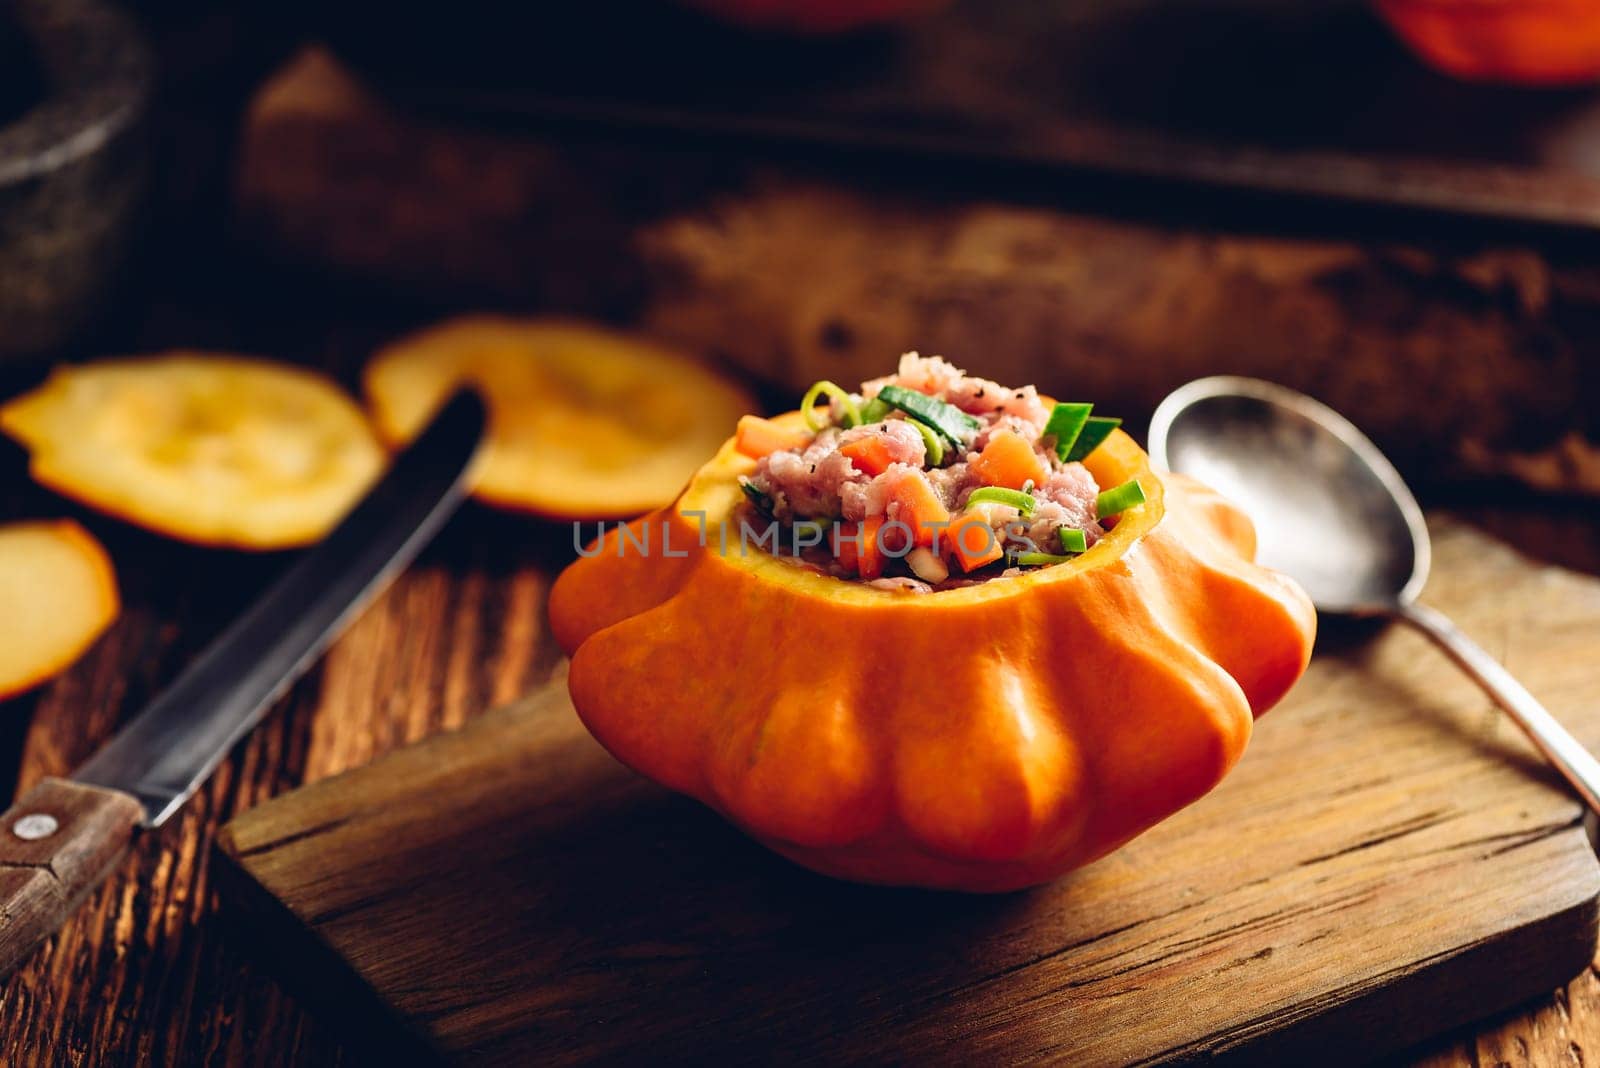 Yellow pattypan squash stuffed with minced meat, carrot and leek by Seva_blsv